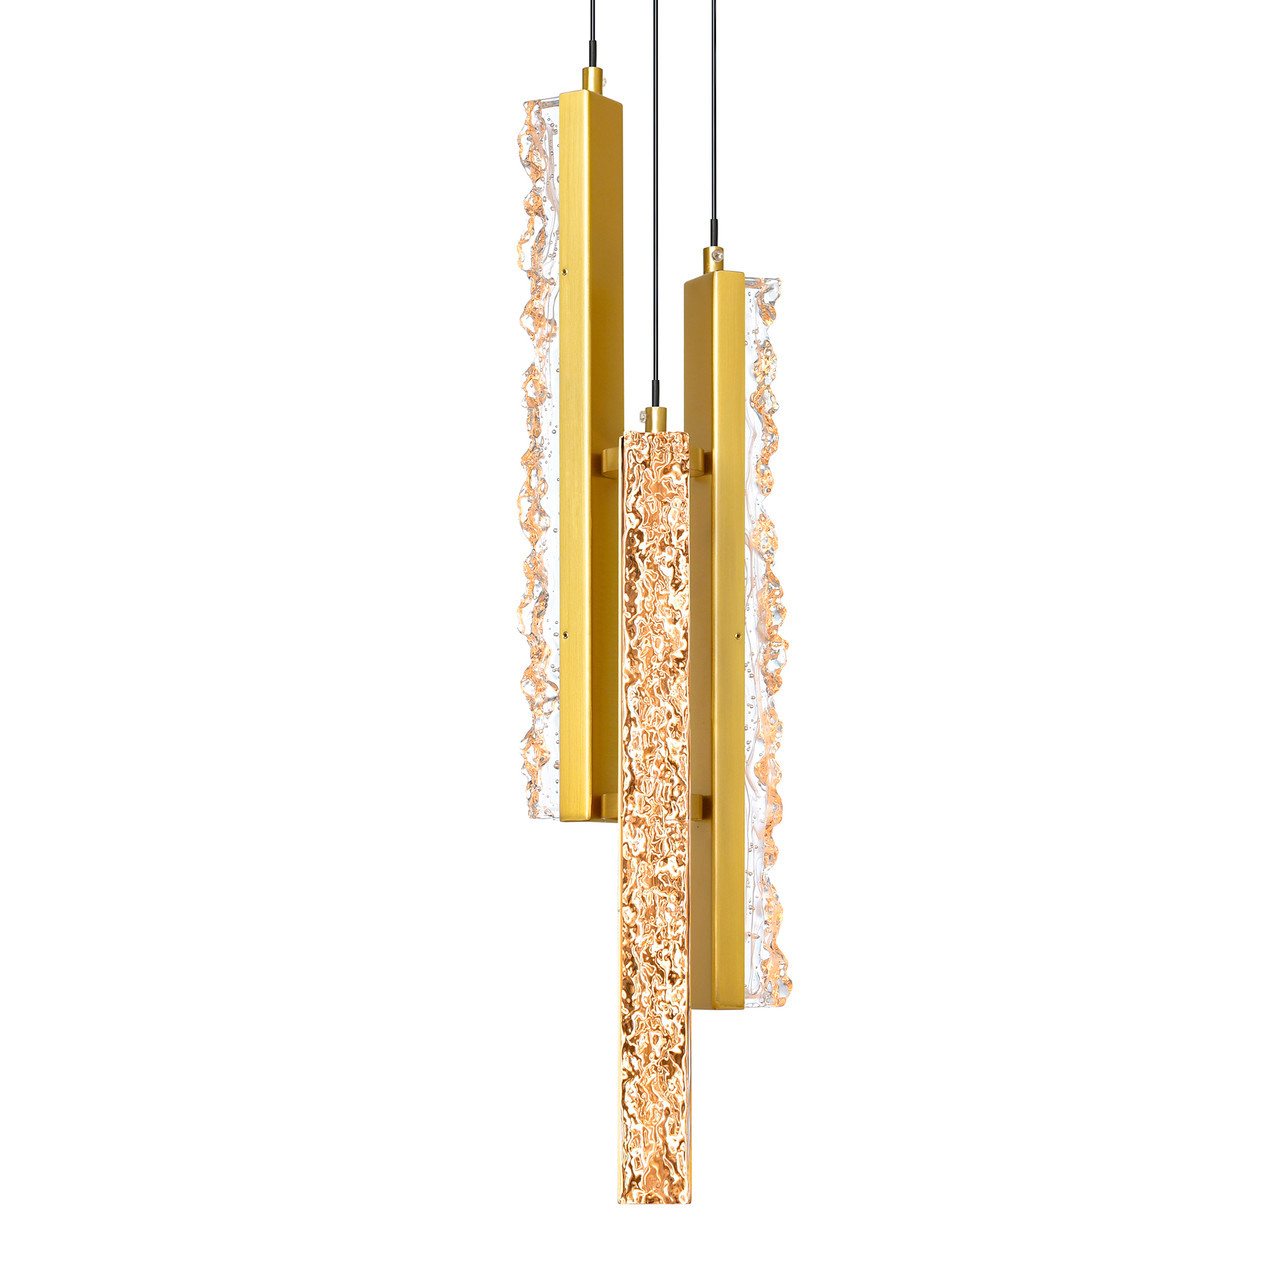 CWI LIGHTING 1588P6-3-624 Stagger Integrated LED Brass Mini Pendant